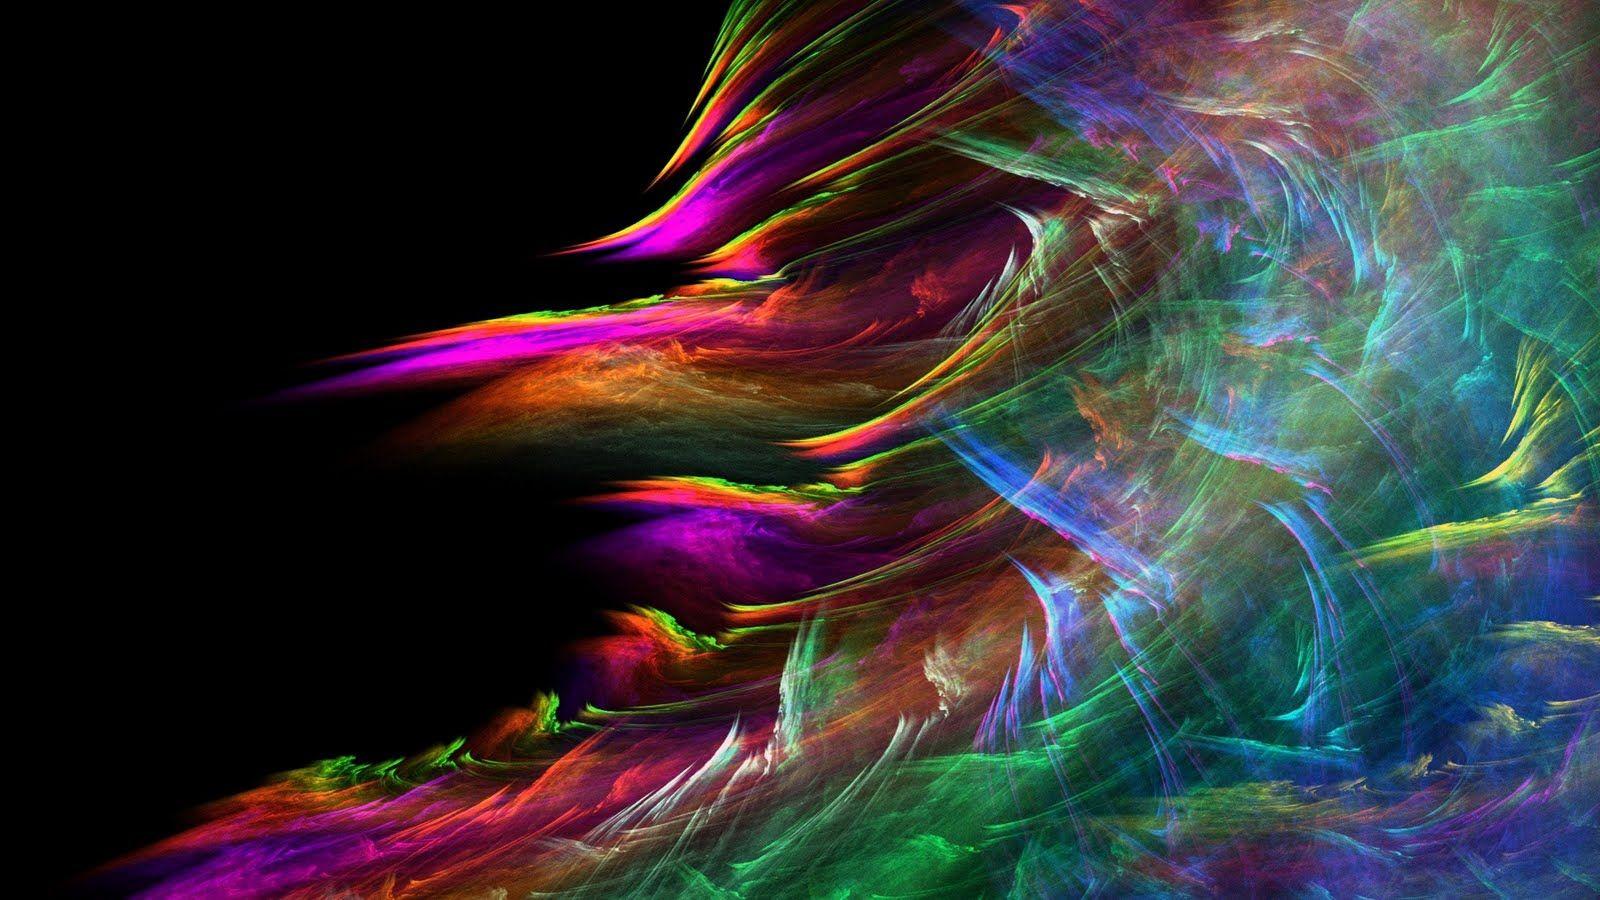 23+ Satisfying Art HD Wallpapers: HD, 4K, 5K for PC and Mobile | Download  free images for iPhone, Android